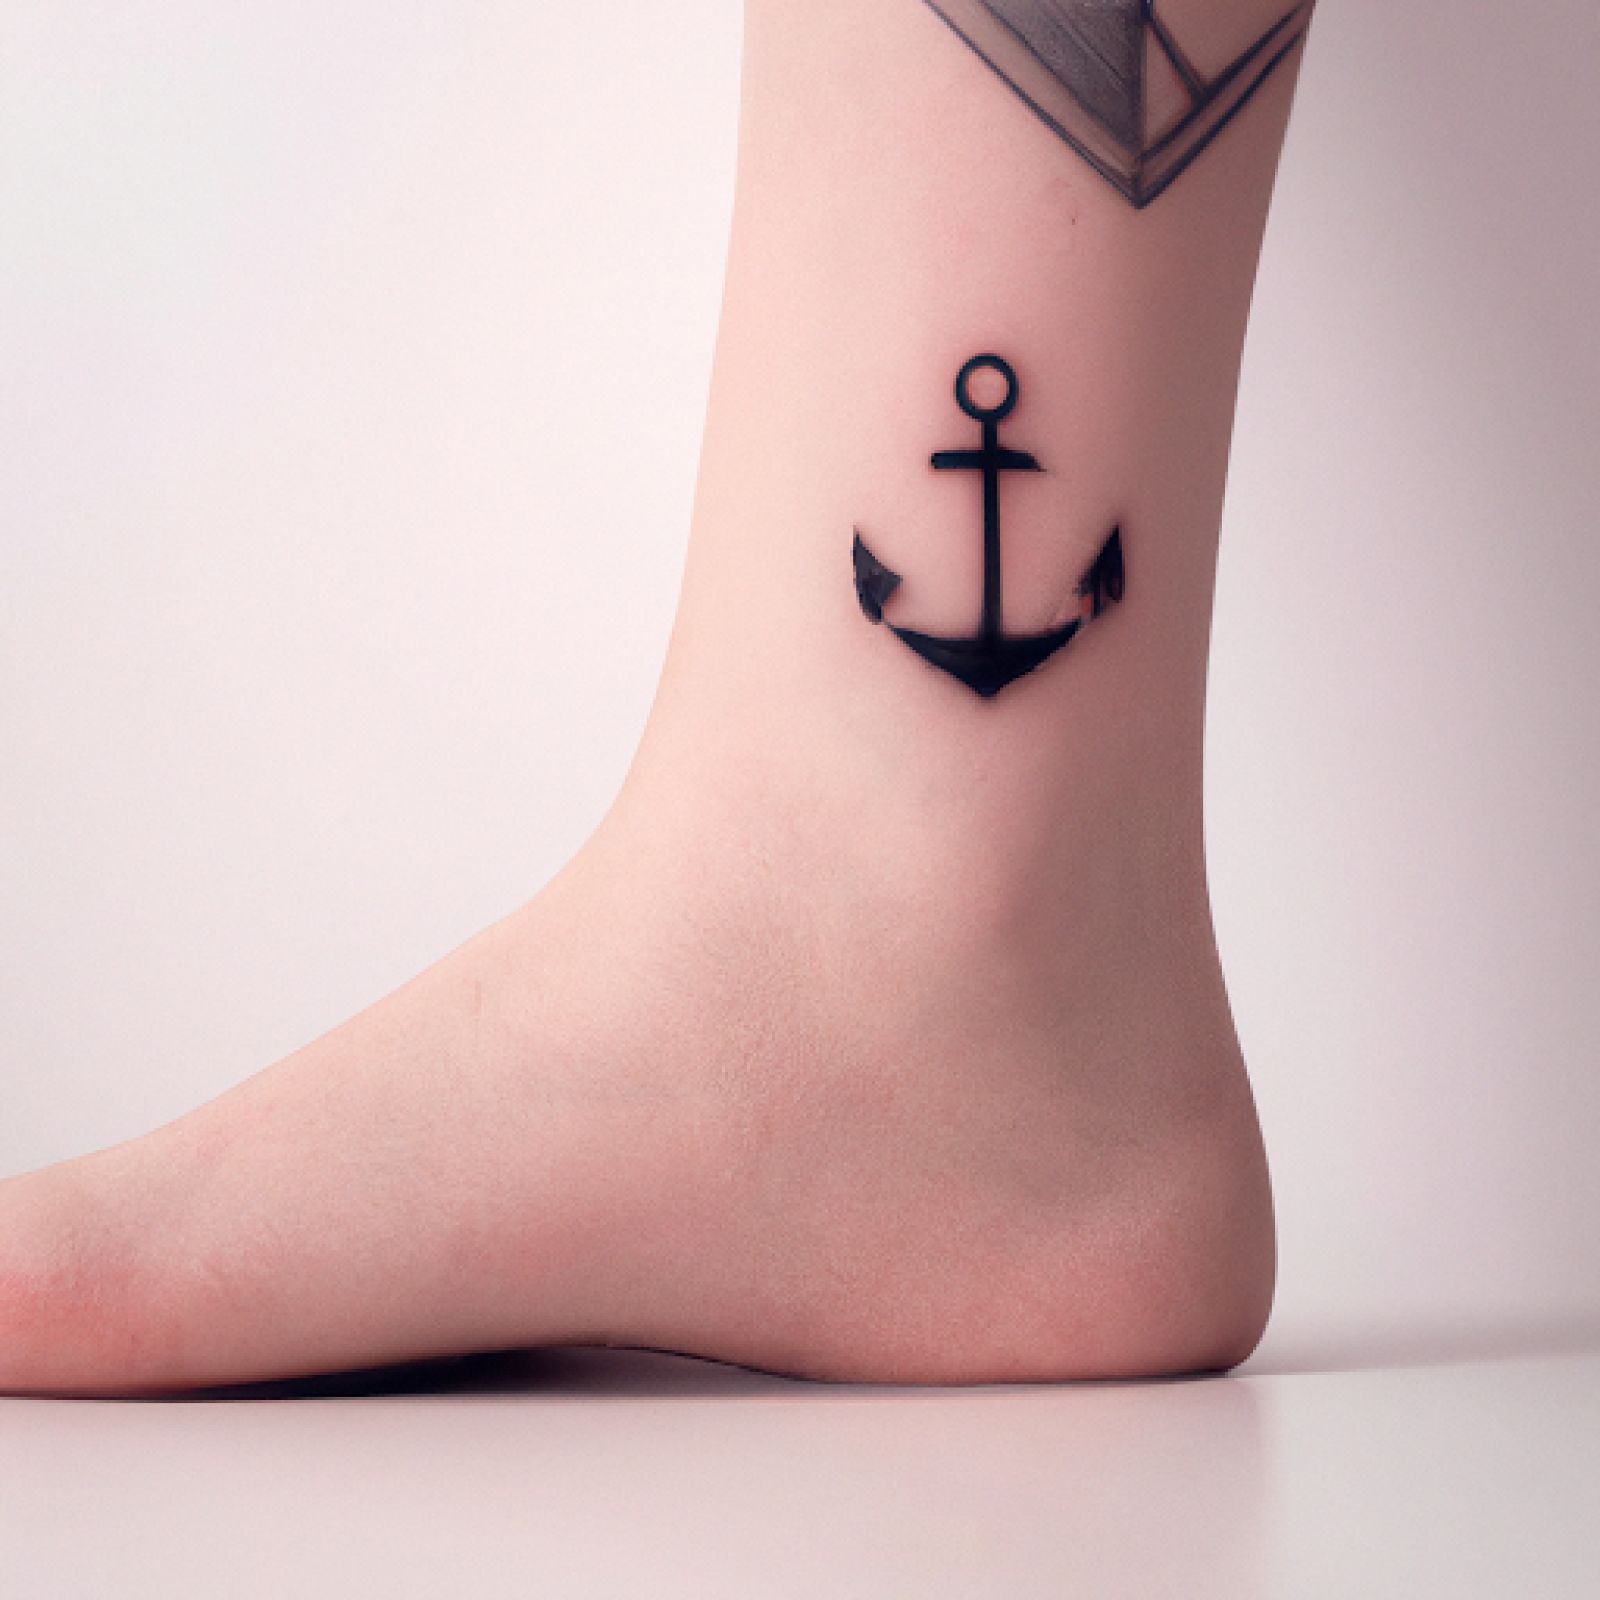 Ship tattoo on ankle for women